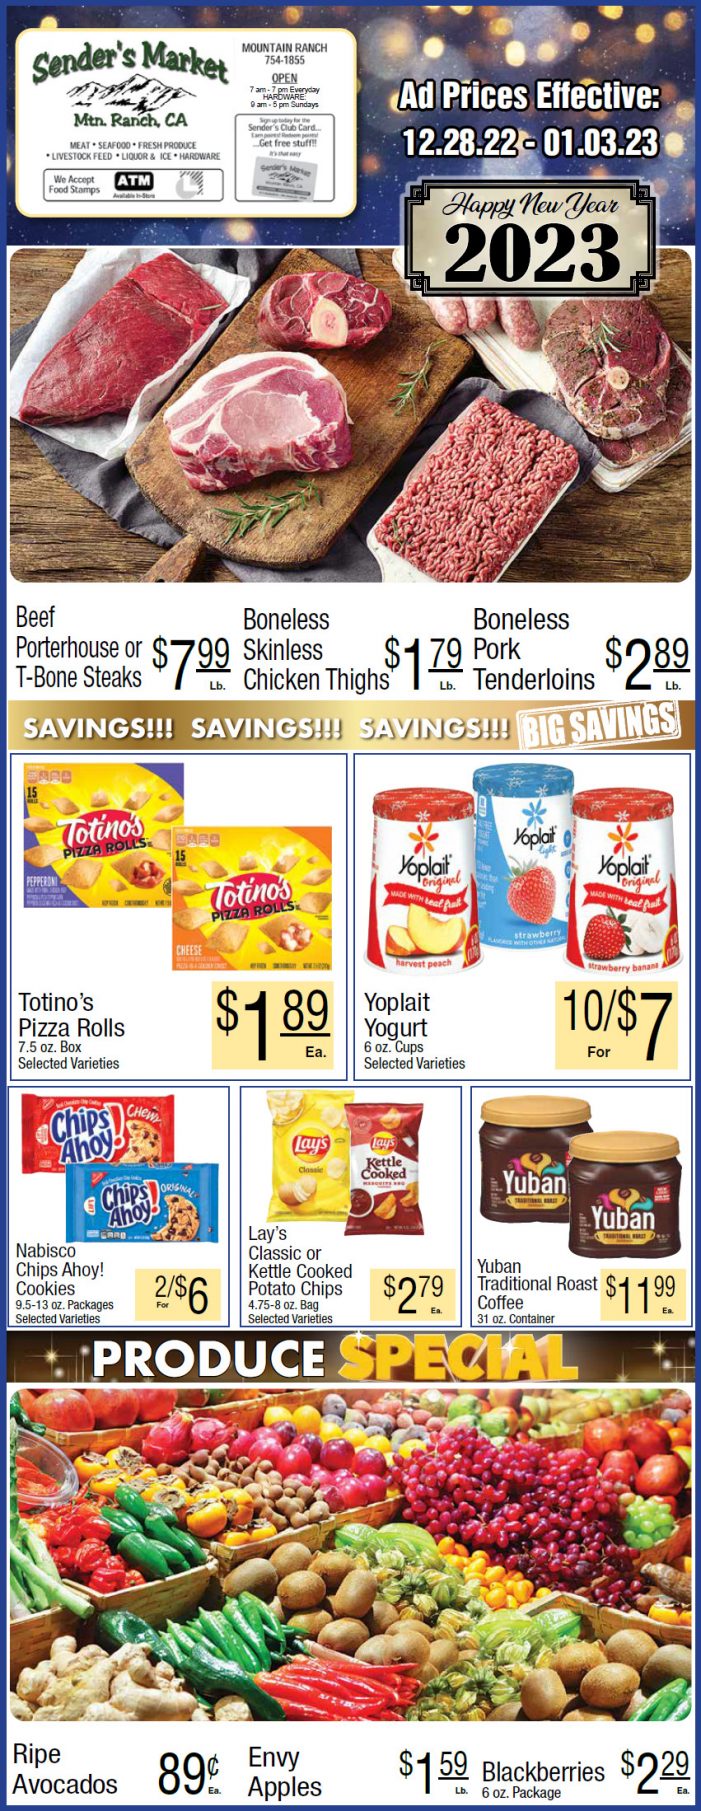 Sender’s Market New Years Ad & Grocery Specials Dec 28 -Jan 3rd! Shop Local & Save!